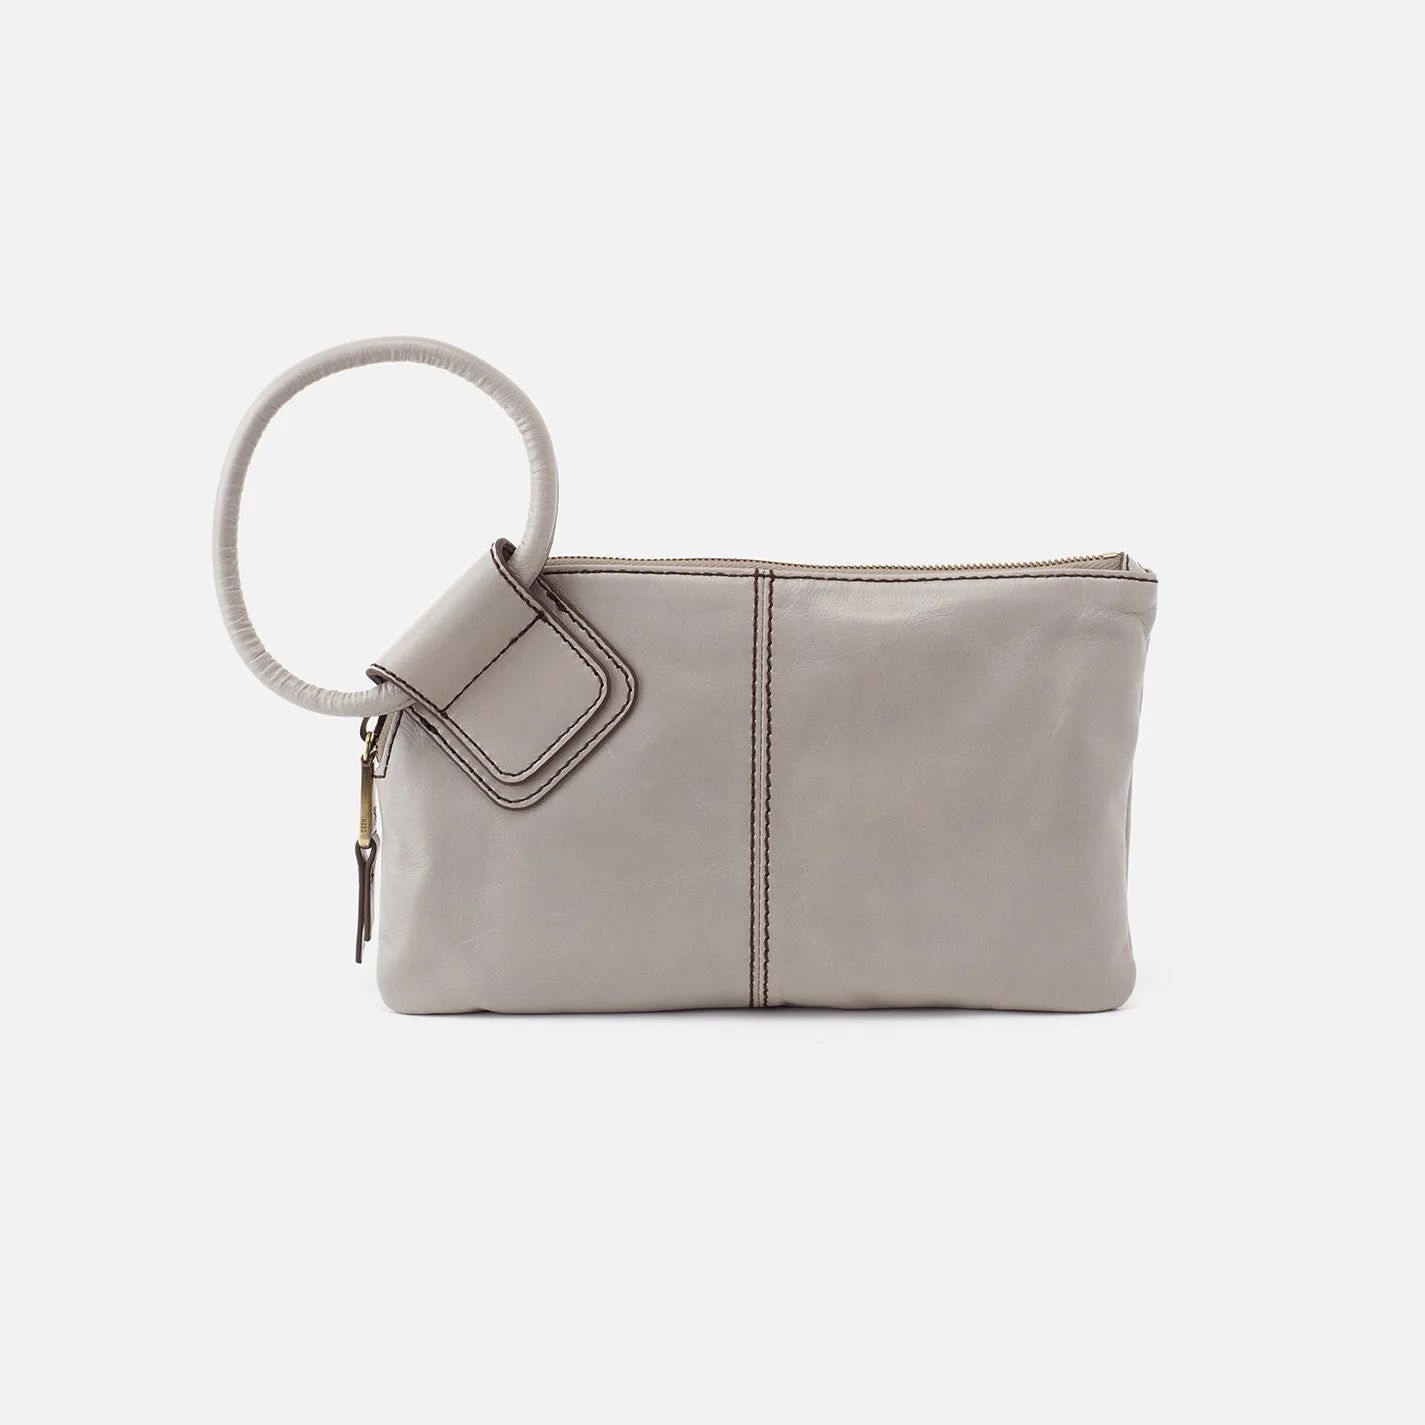 Sable Wristlet in Polished Leather - Driftwood | HOBO Bags